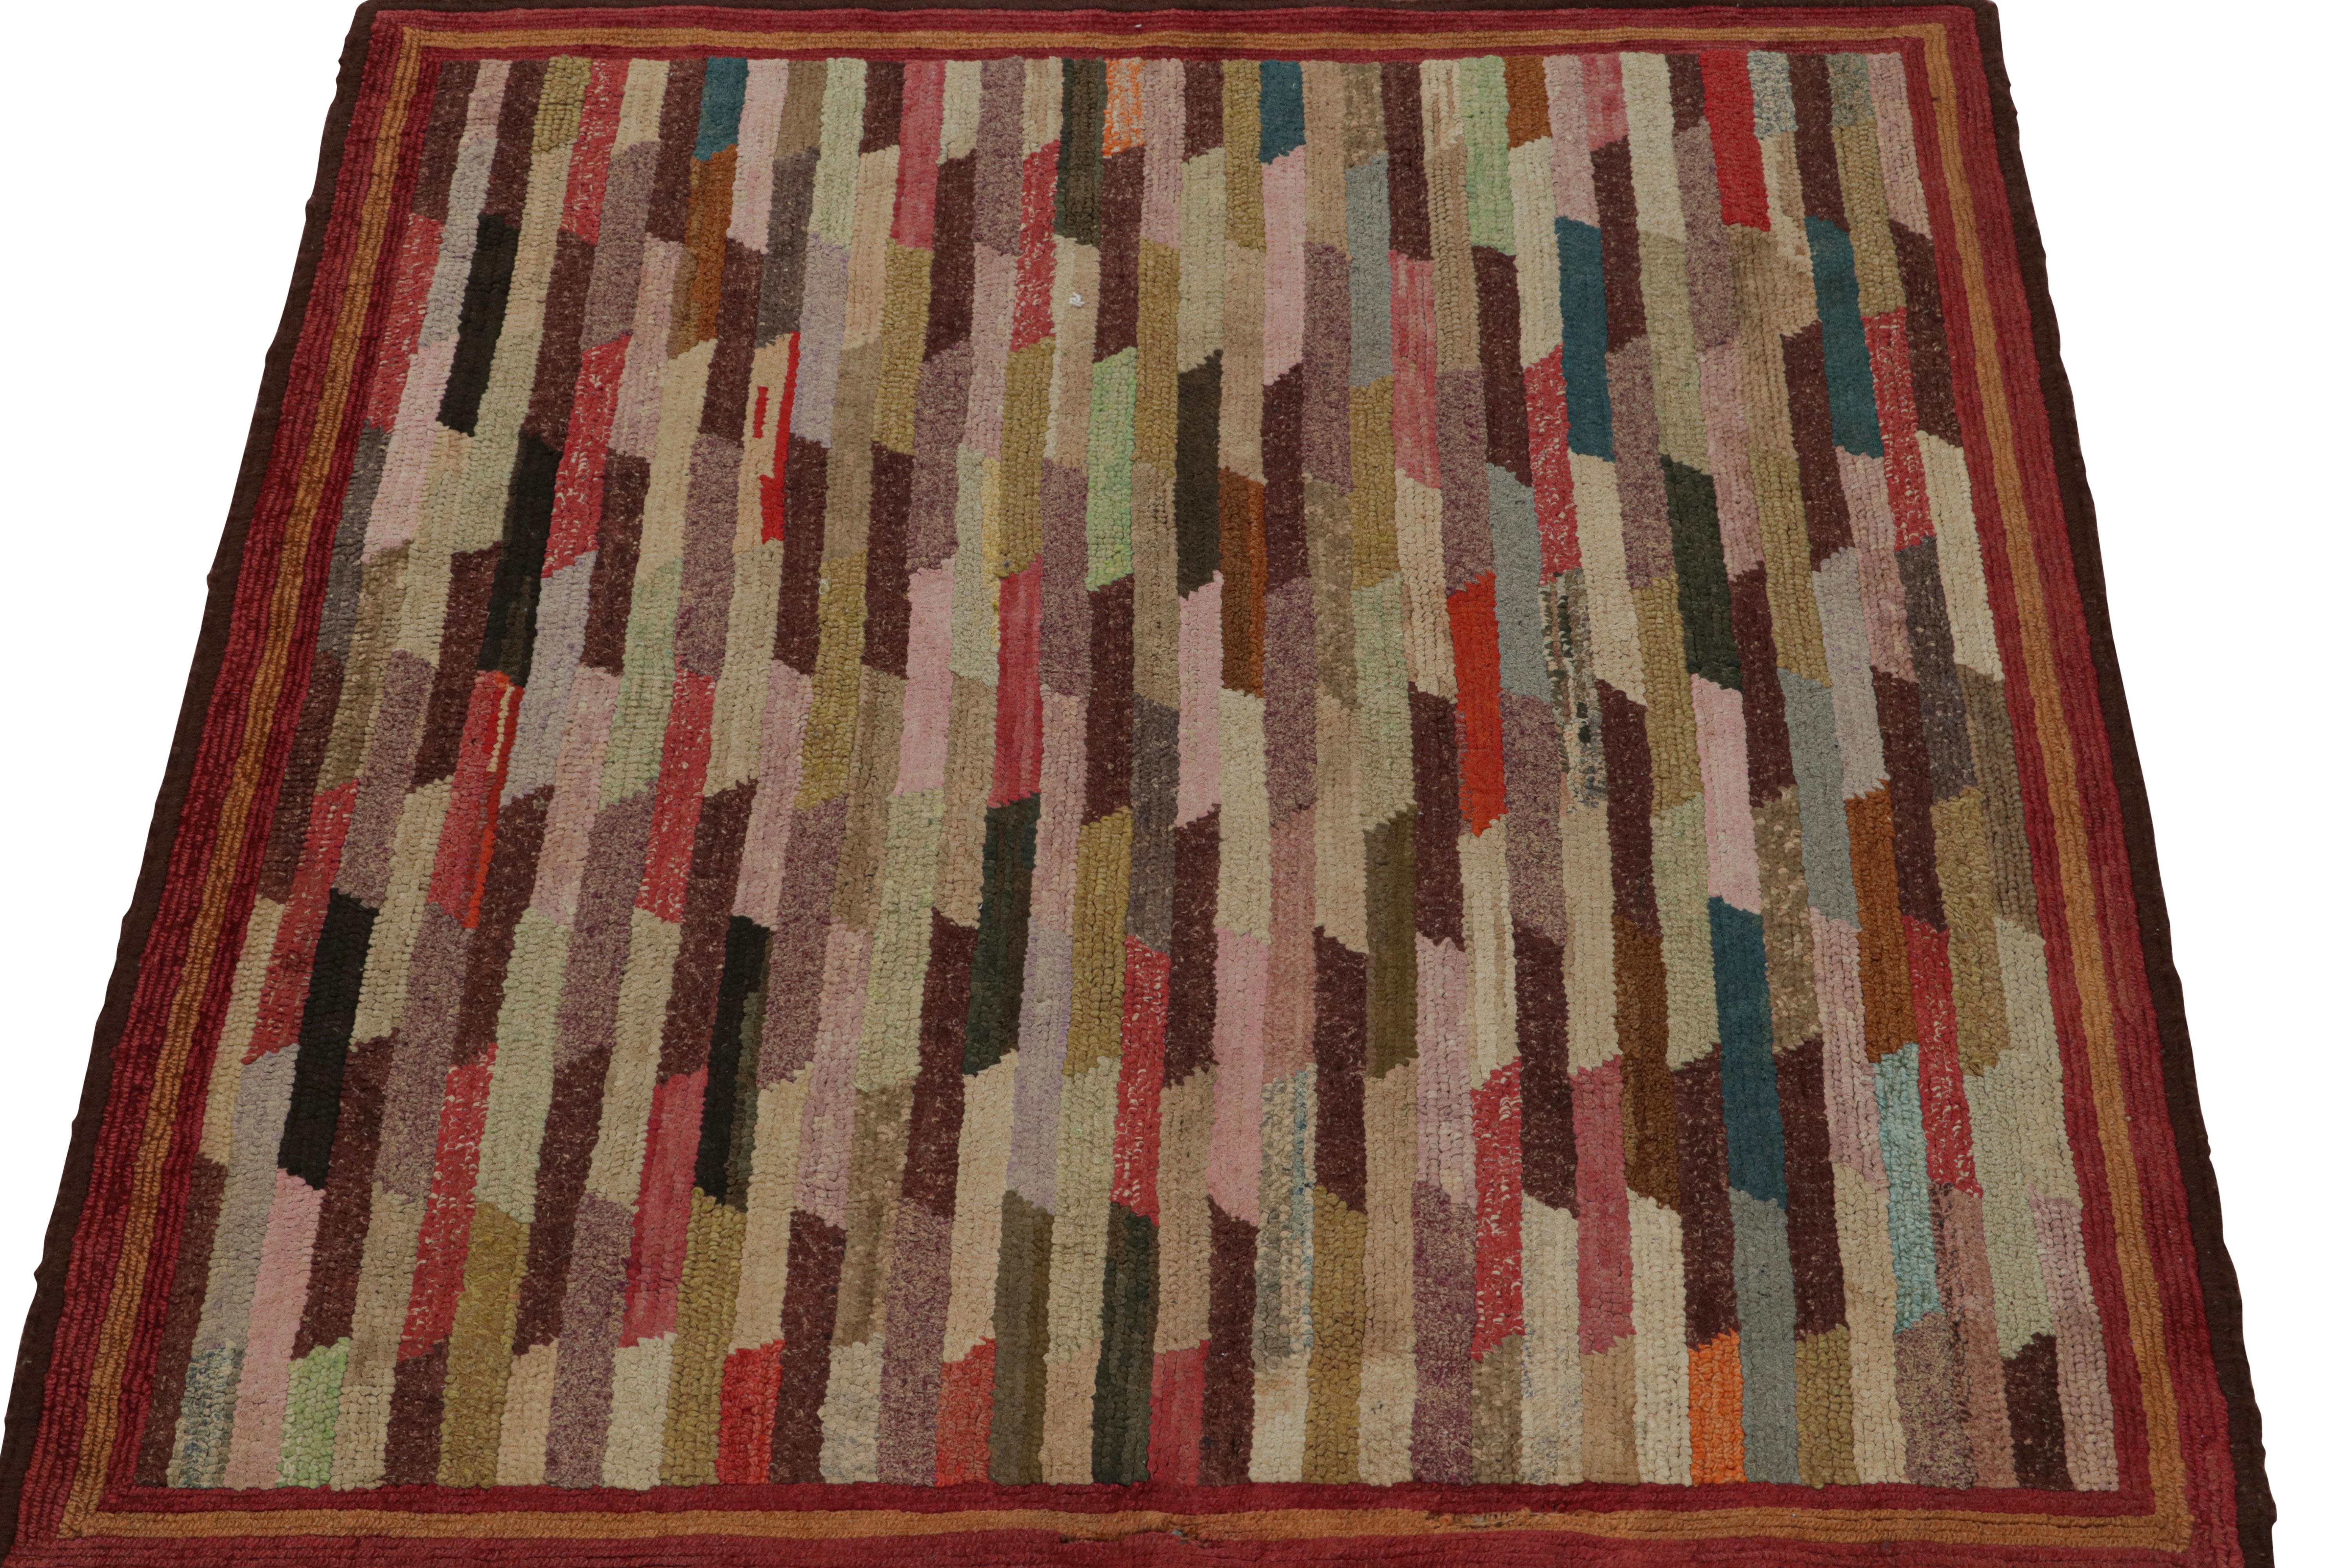 A rare 3x3 antique hooked square rug of United States provenance, handmade in wool and fabric circa 1920-1930, featuring polychromatic geometric patterns. 

On the Design: 

This collectible piece enjoys geometric patterns in polychromatic colorway